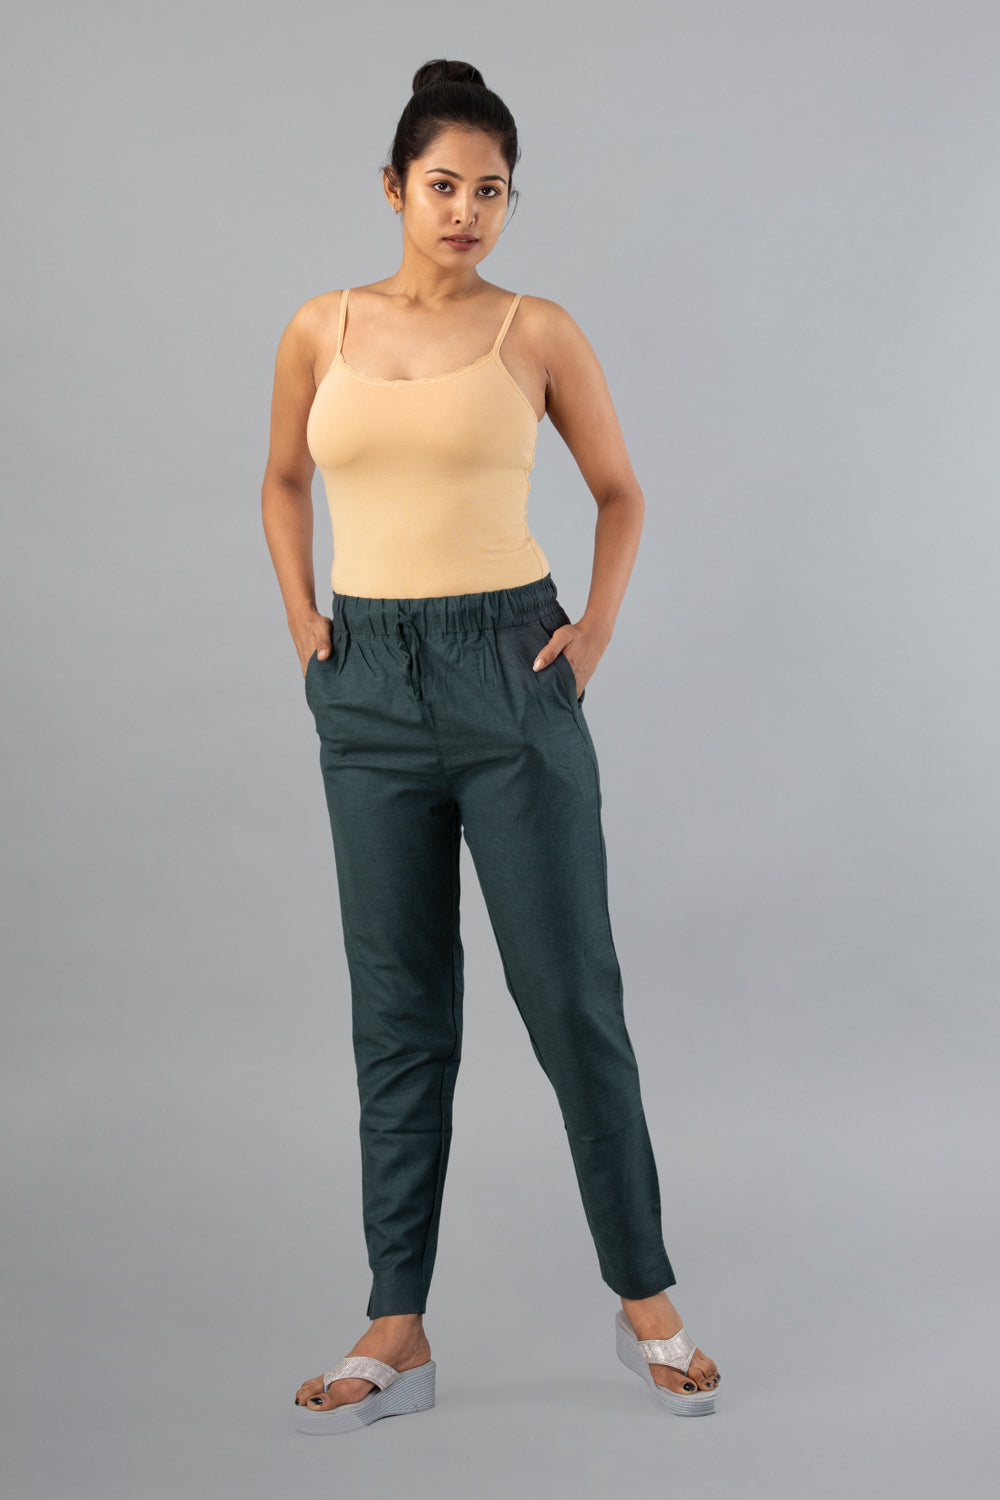 How to Style Peg Trousers? | Ideas and Inspiration – Radhella